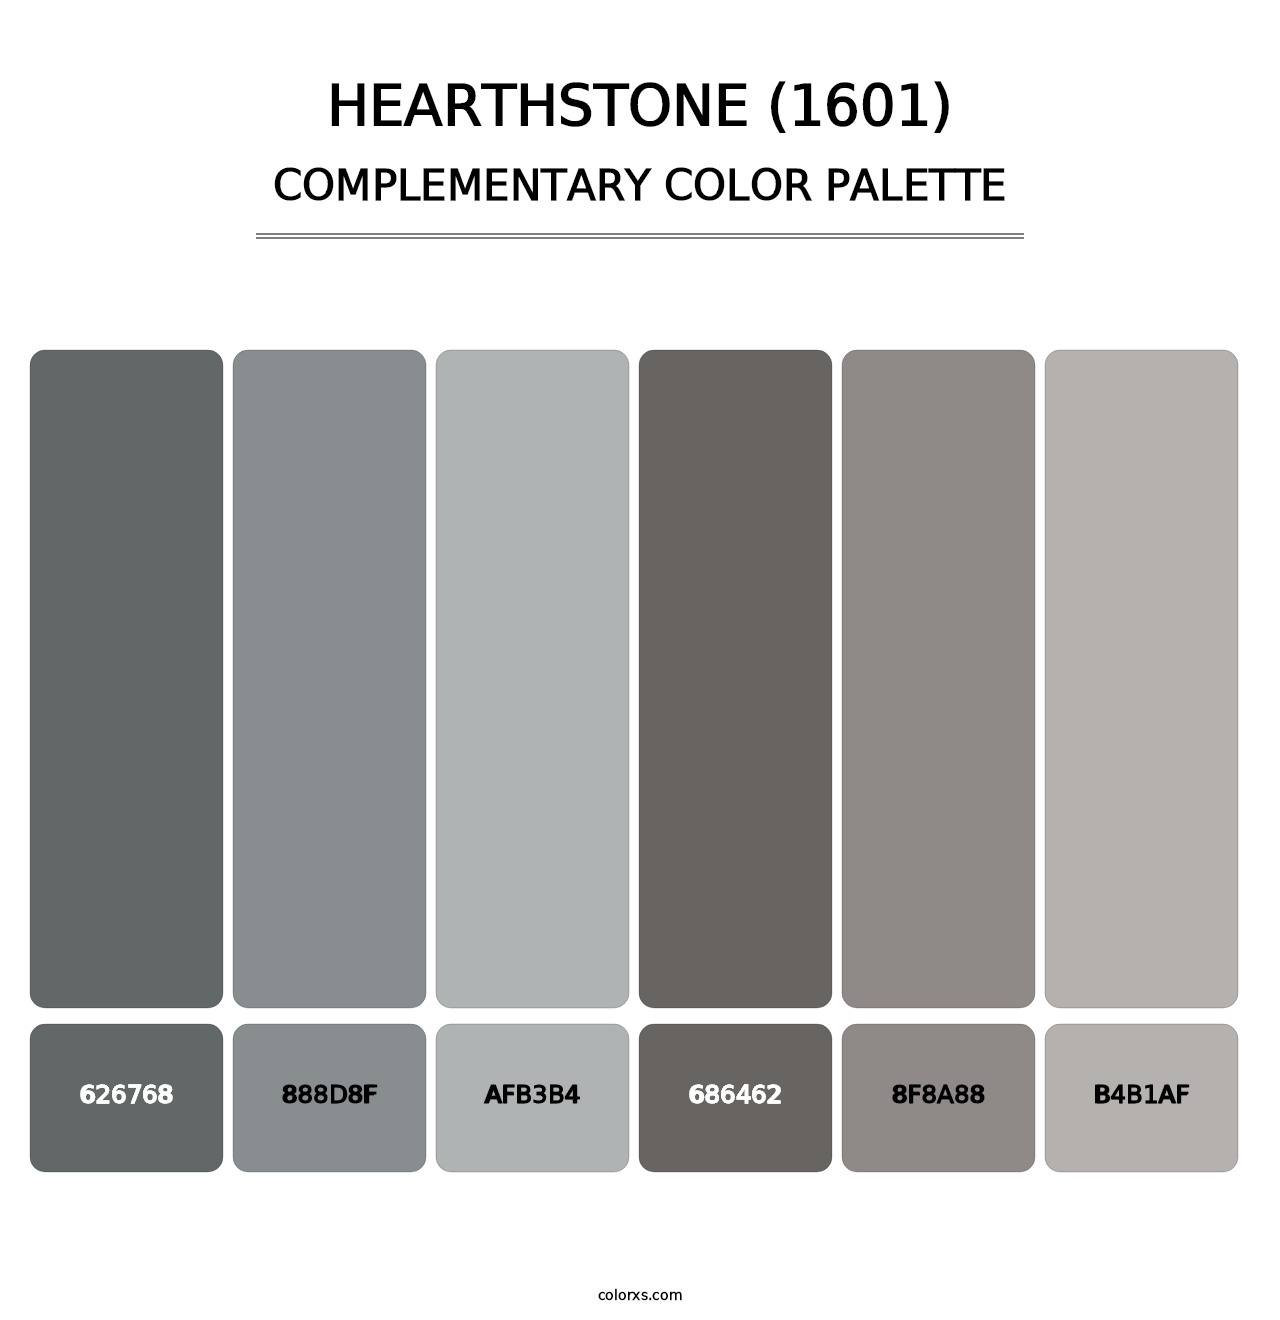 Hearthstone (1601) - Complementary Color Palette